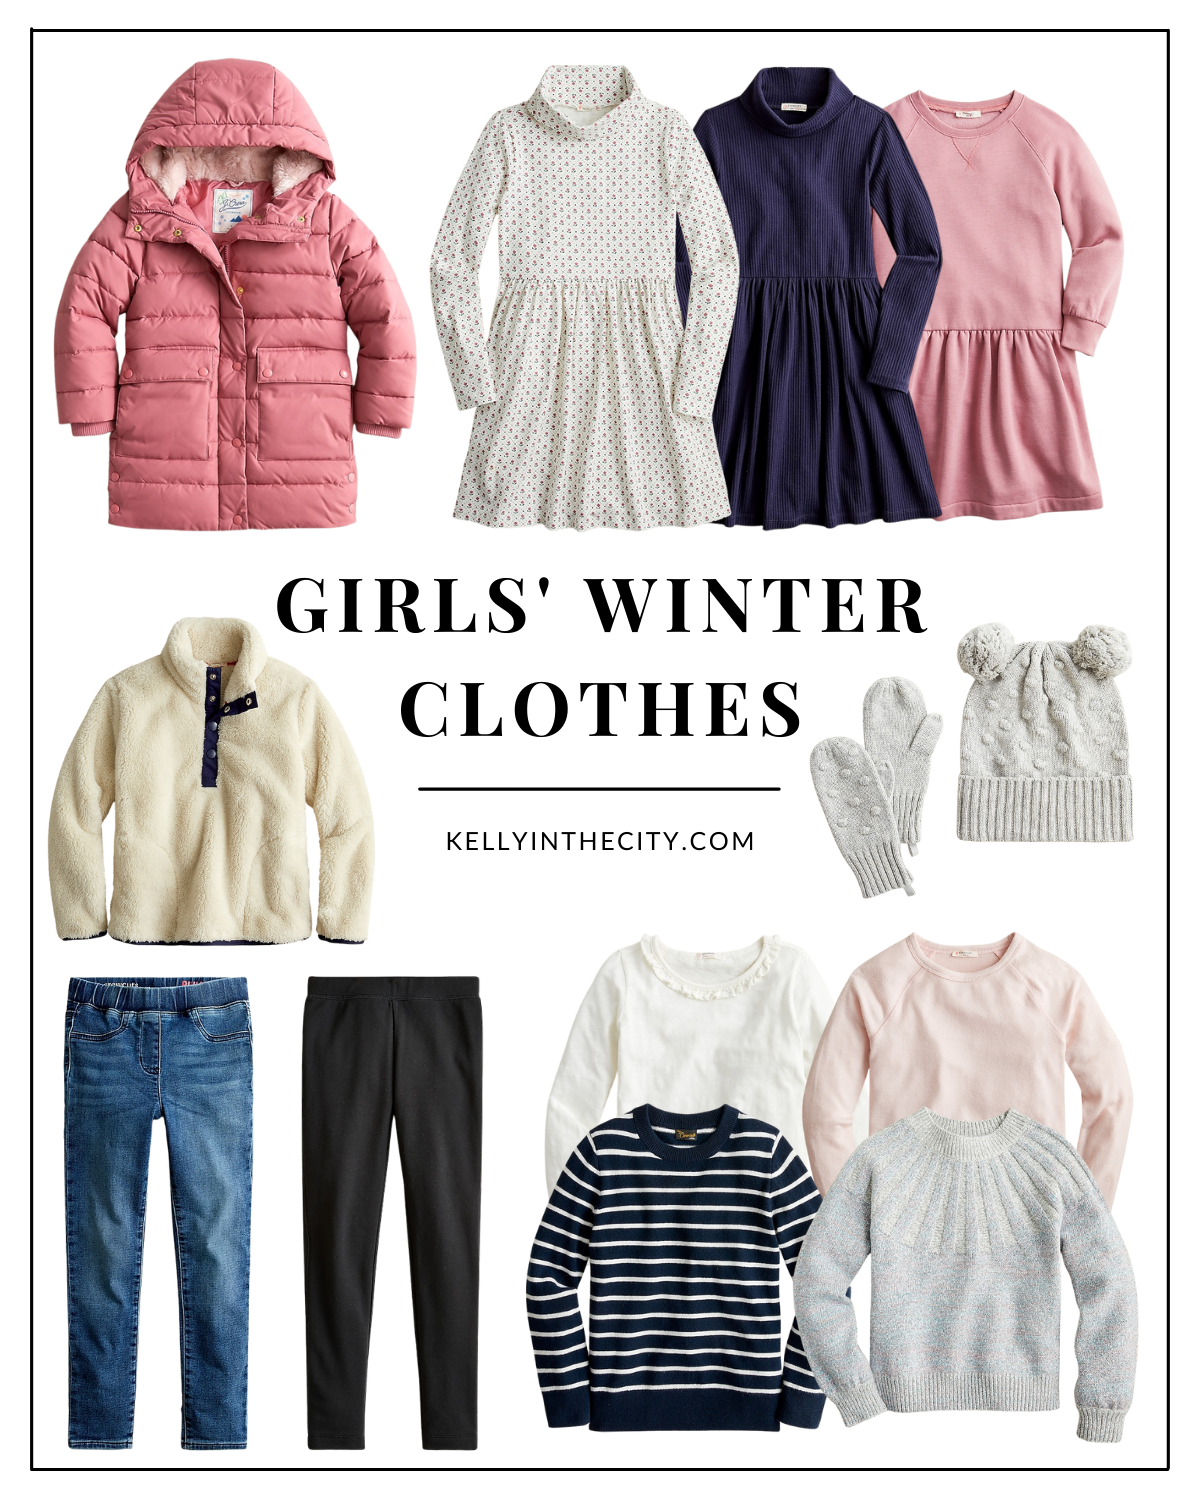 Girls' Winter Clothes